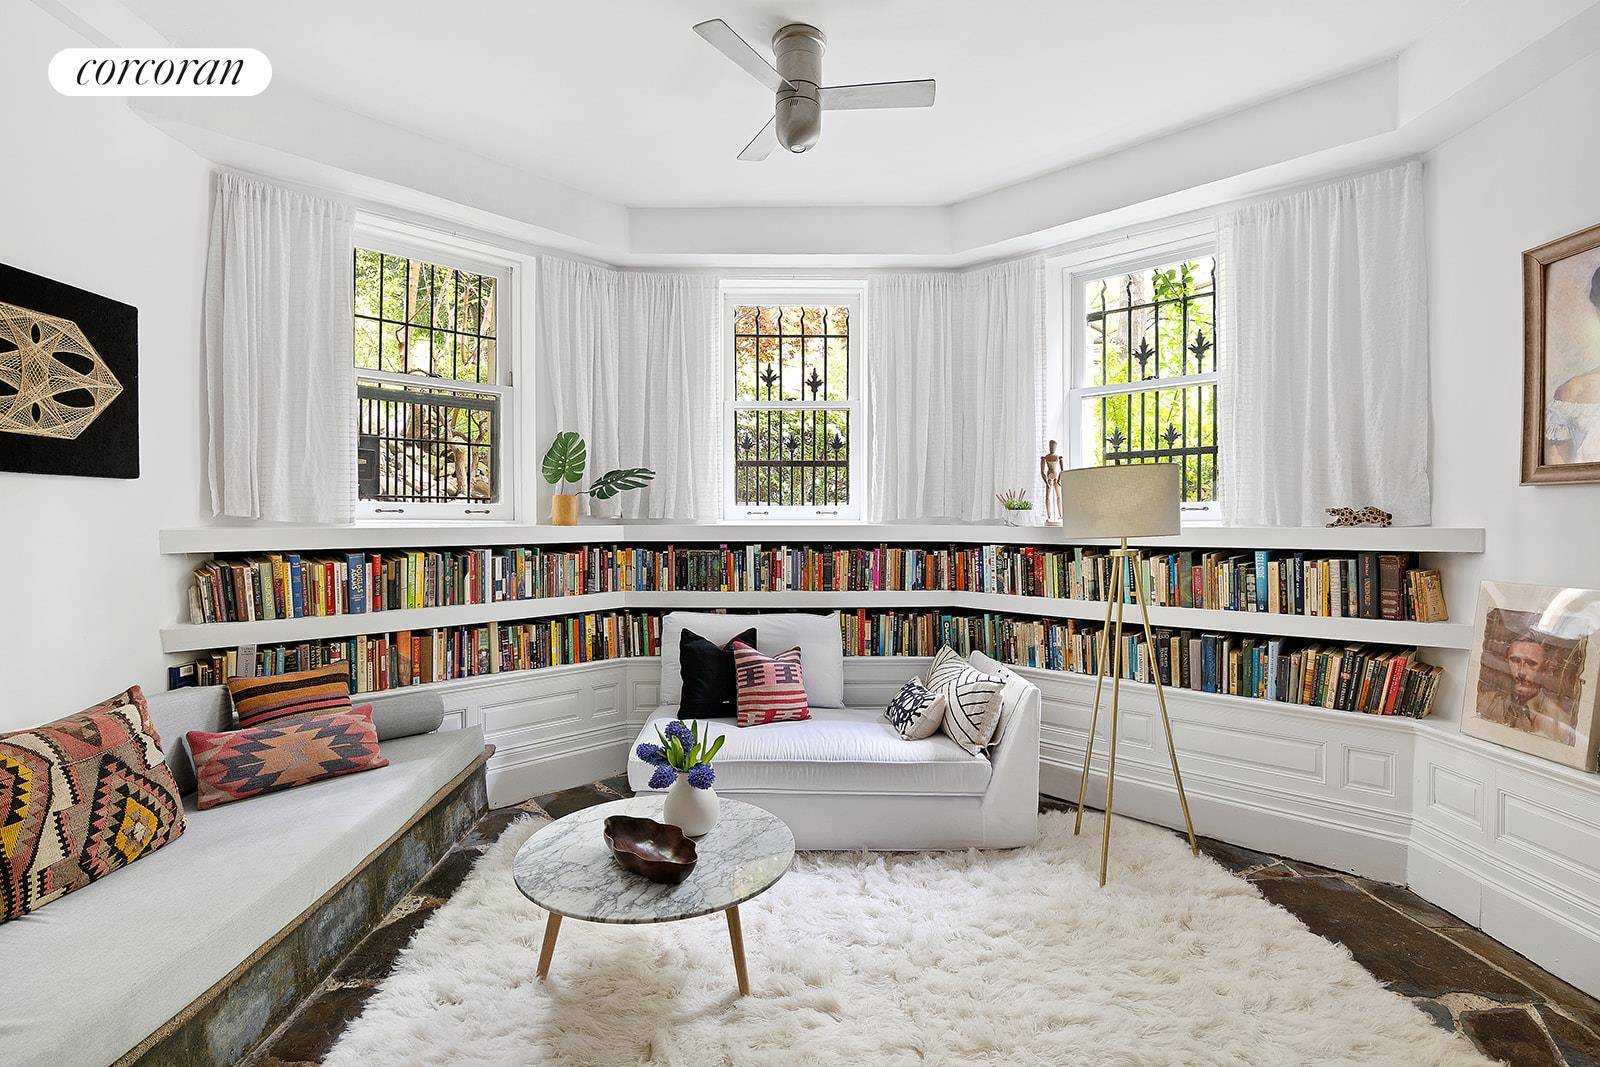 As seen in Apartment Therapy and The New York Times this is fairytale living in prime Clinton Hill !